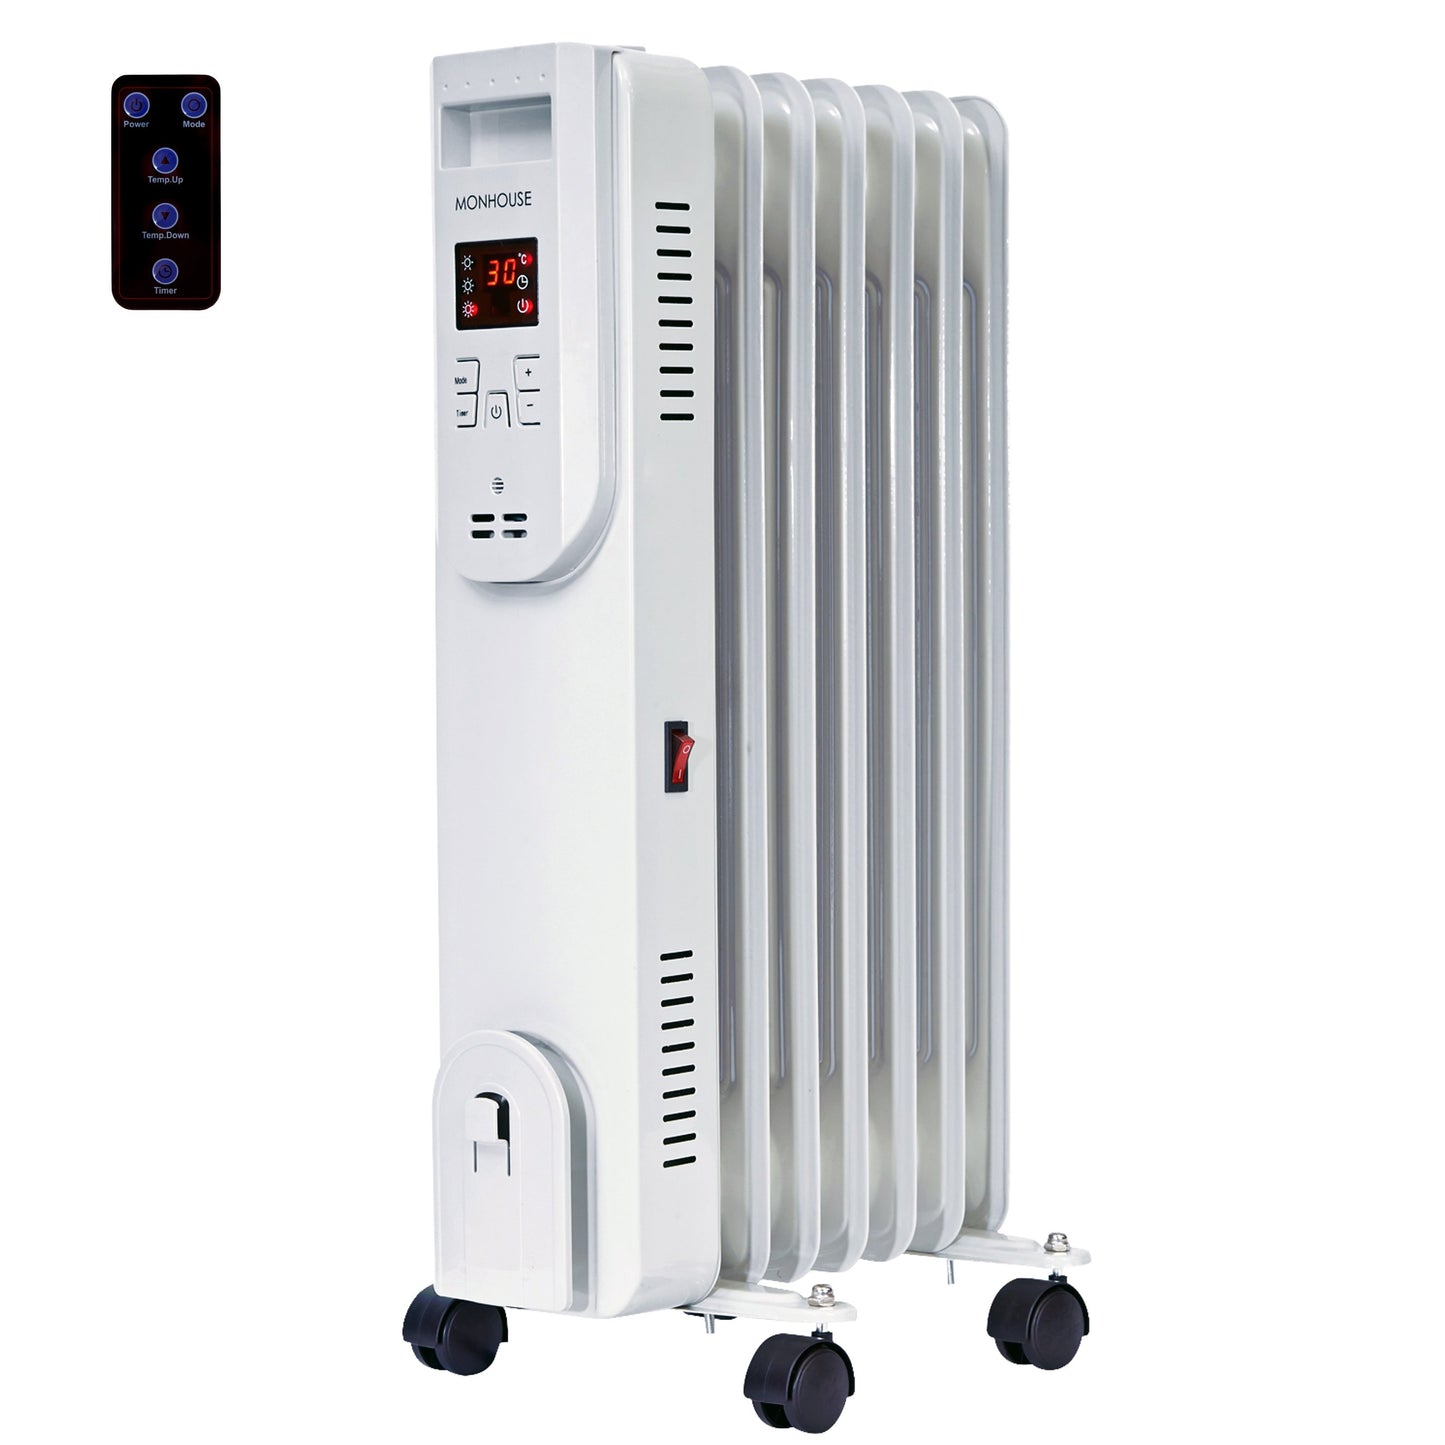 Digital Oil Filled Electric Heater Remote Control Powerful 7-11 Fins 600-2500W